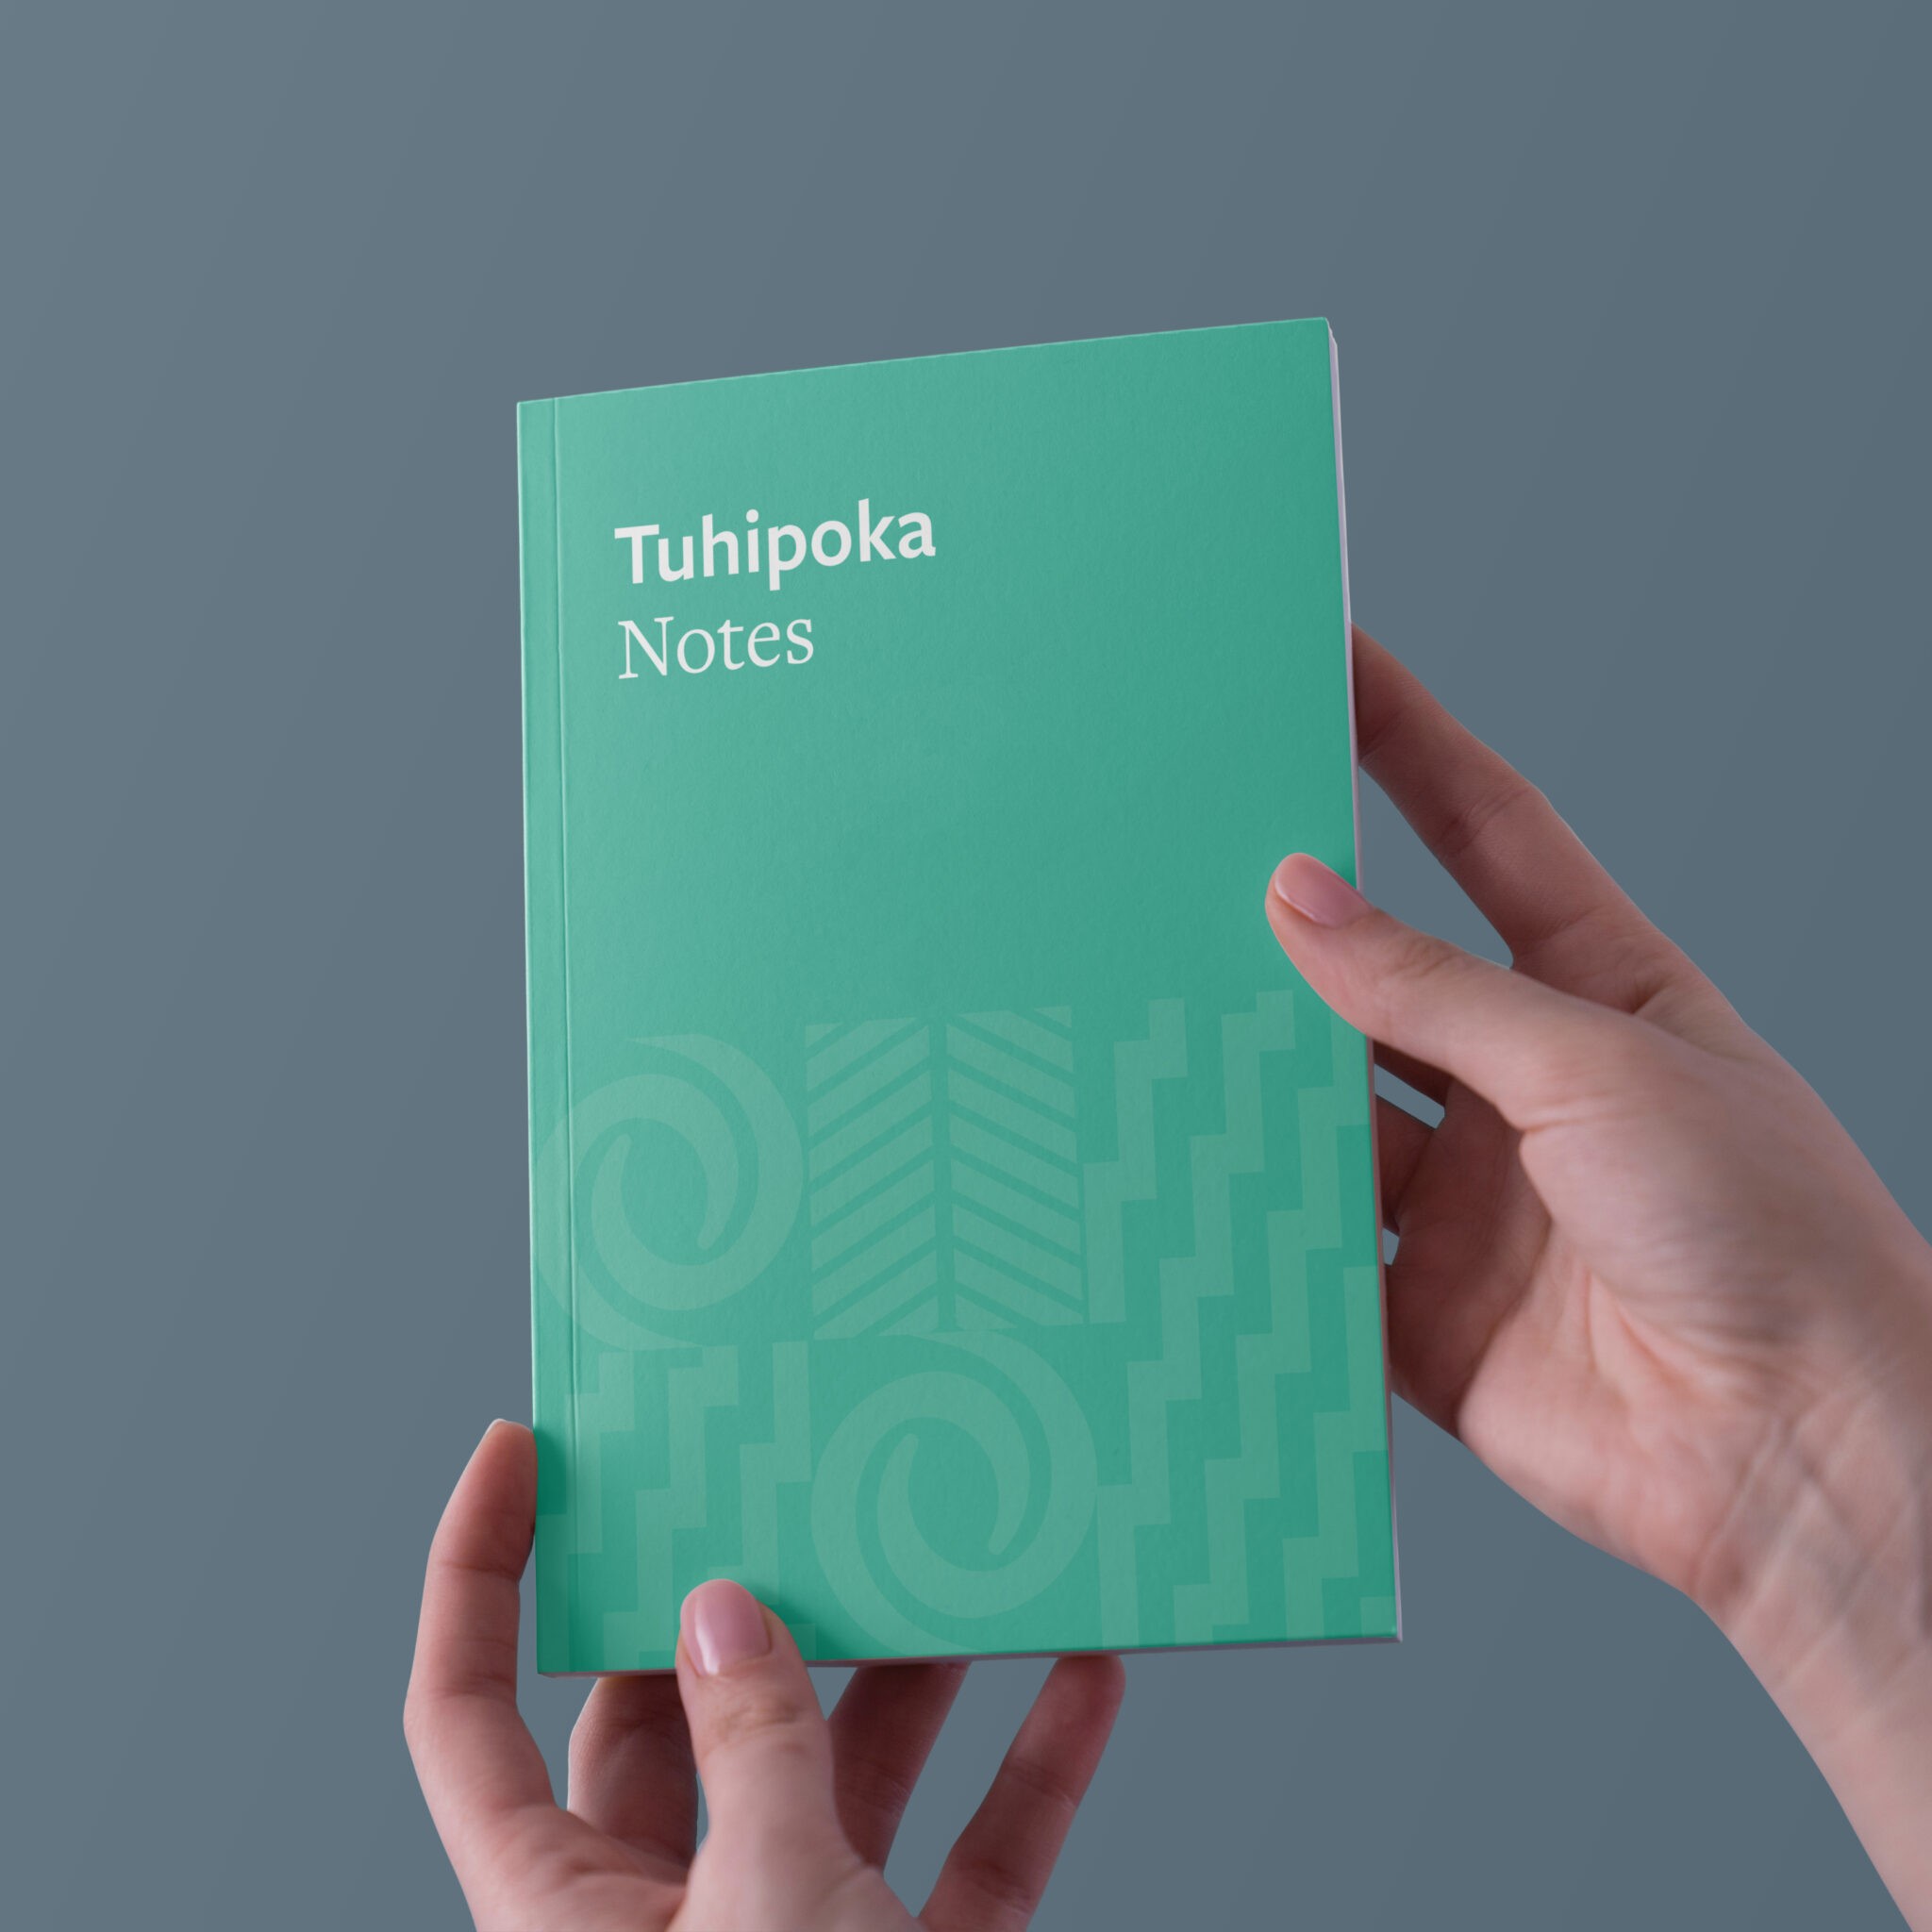 Notebook designed in Akoako Branding held by two hands and saying "Tuhipoka"